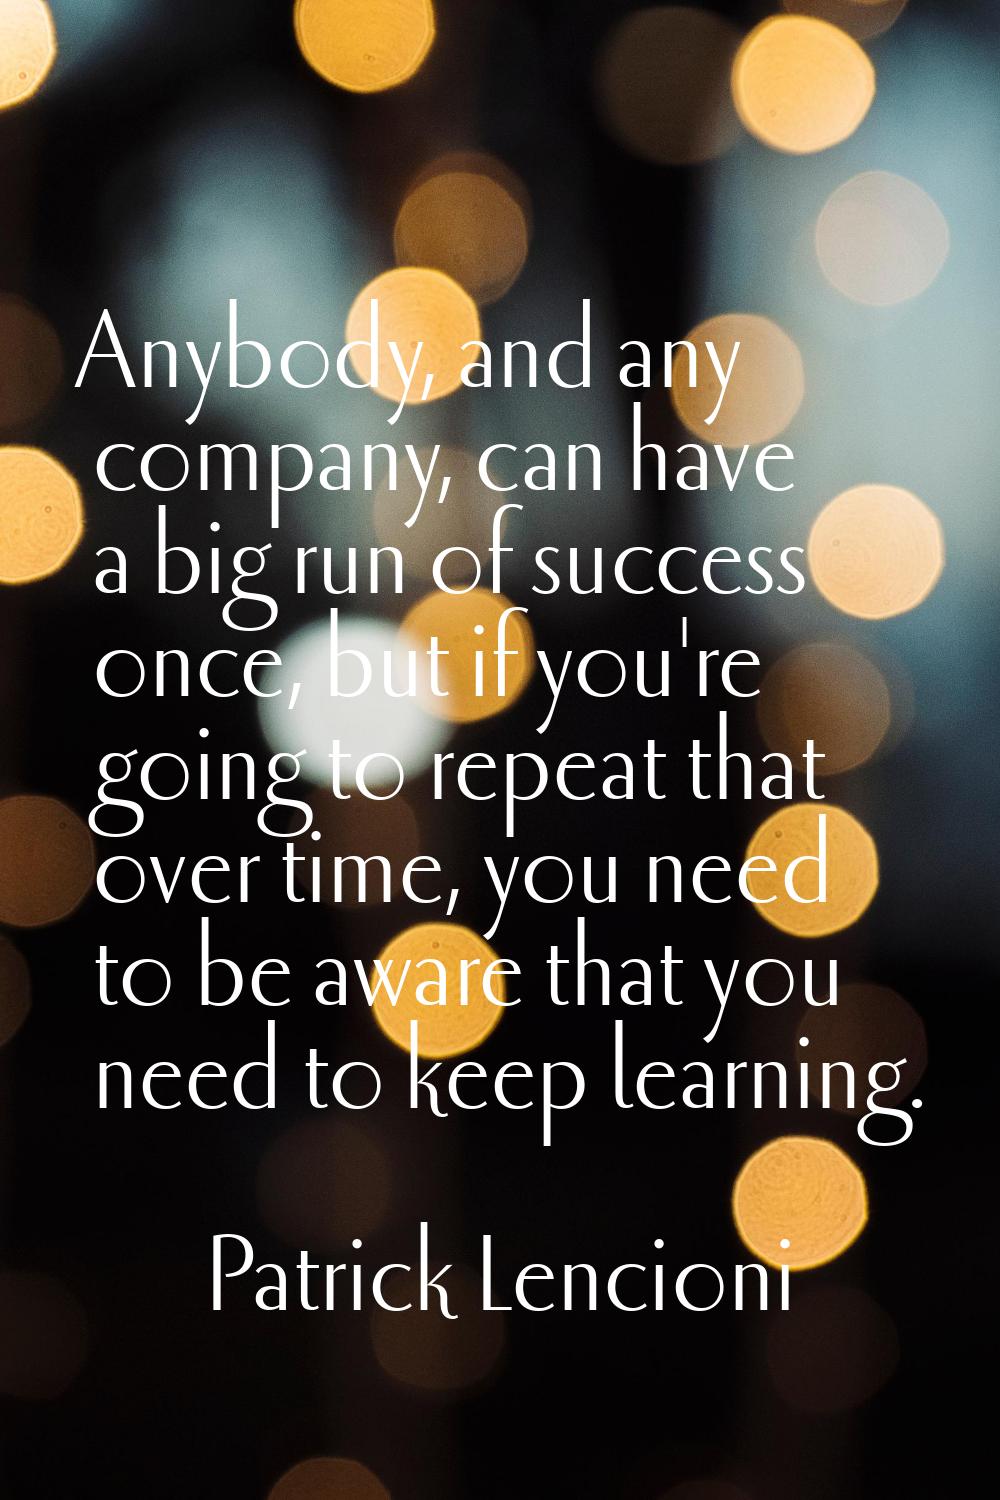 Anybody, and any company, can have a big run of success once, but if you're going to repeat that ov